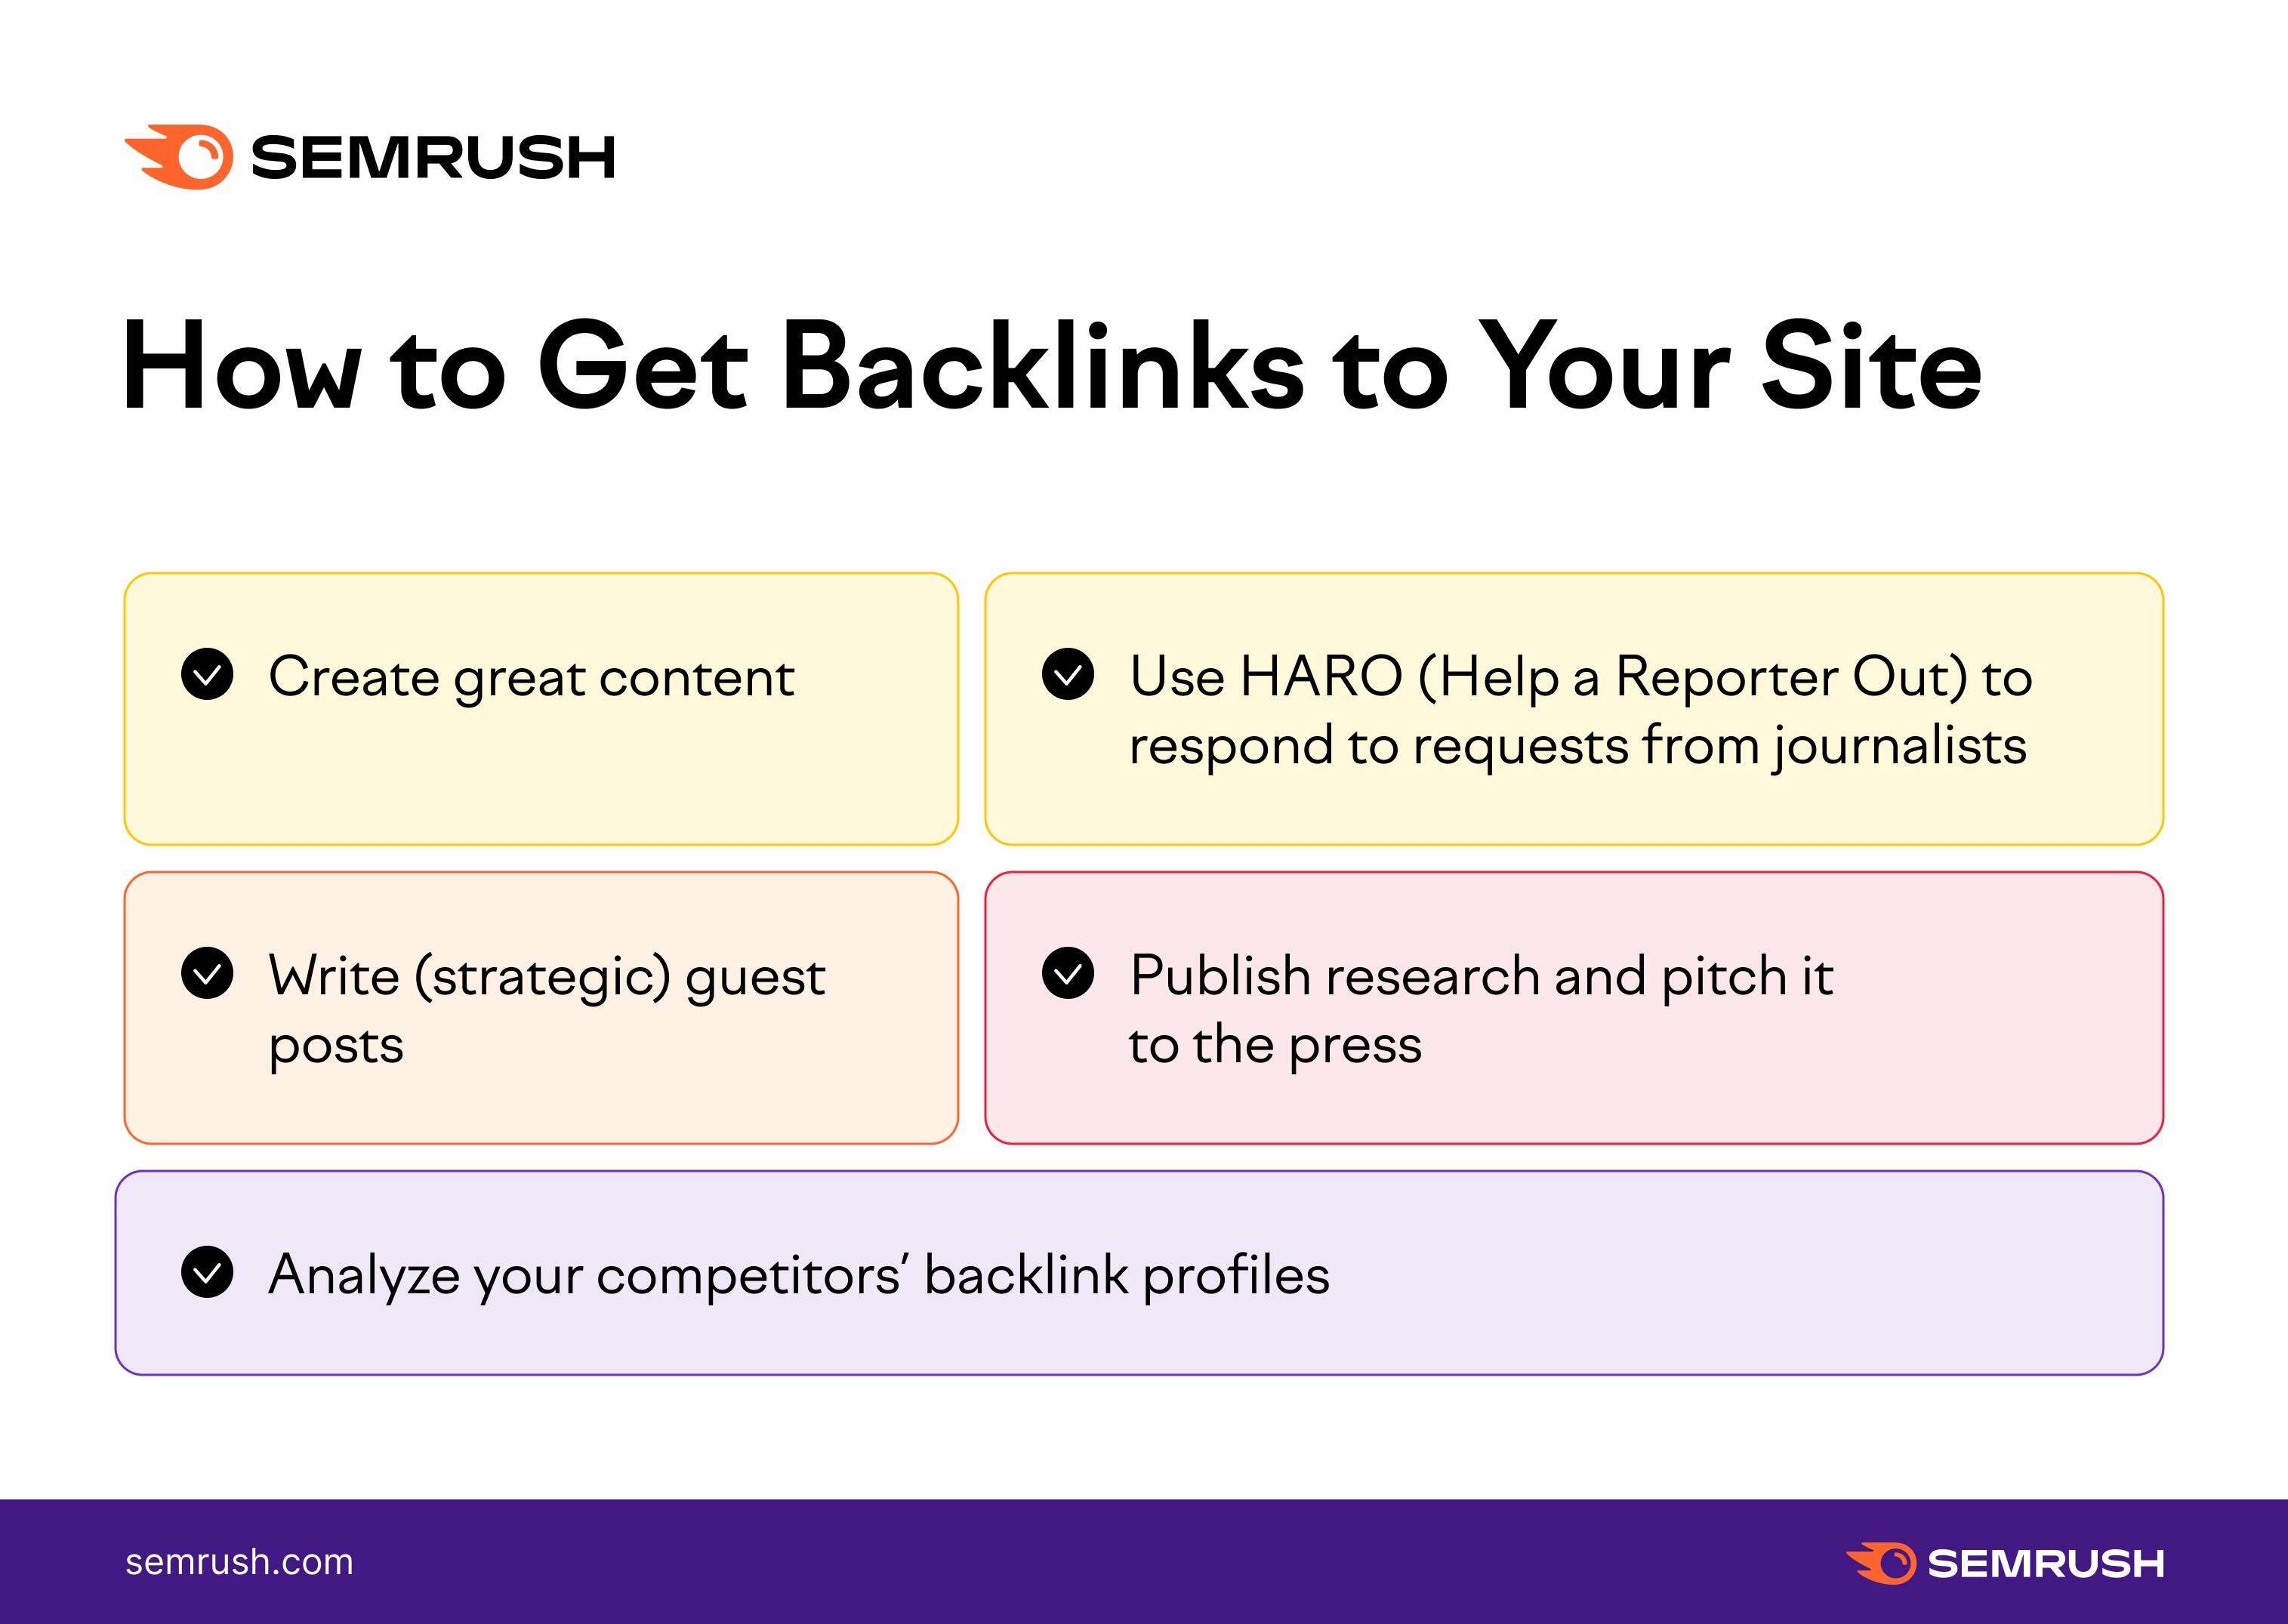 Are backlinks legal?